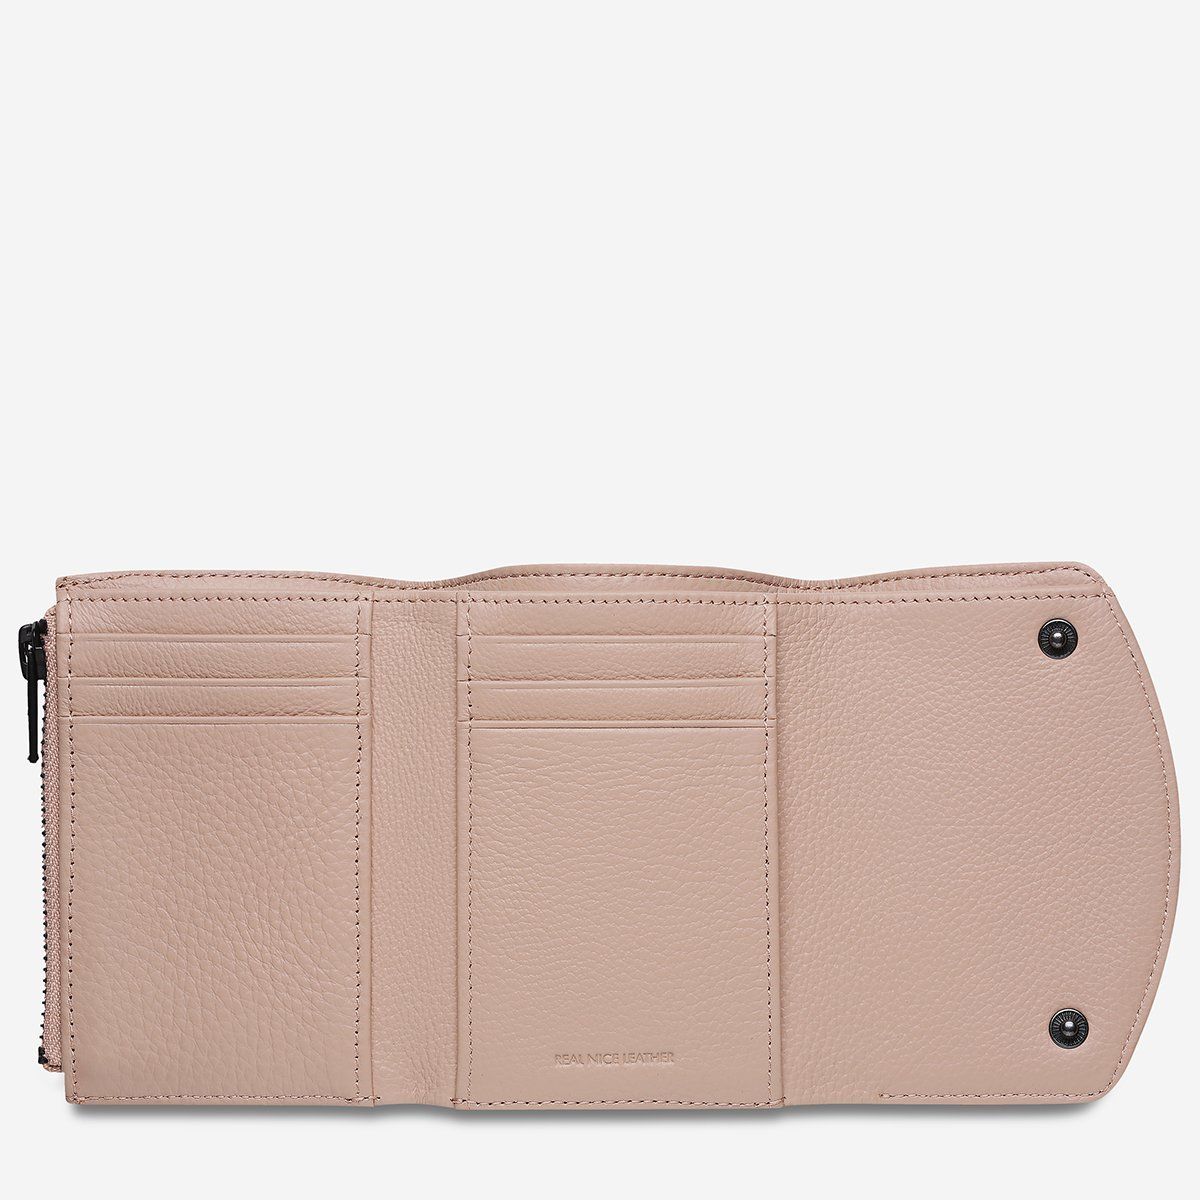 Lucky Sometimes Wallet // Dusty Pink ~ Status Anxiety ~